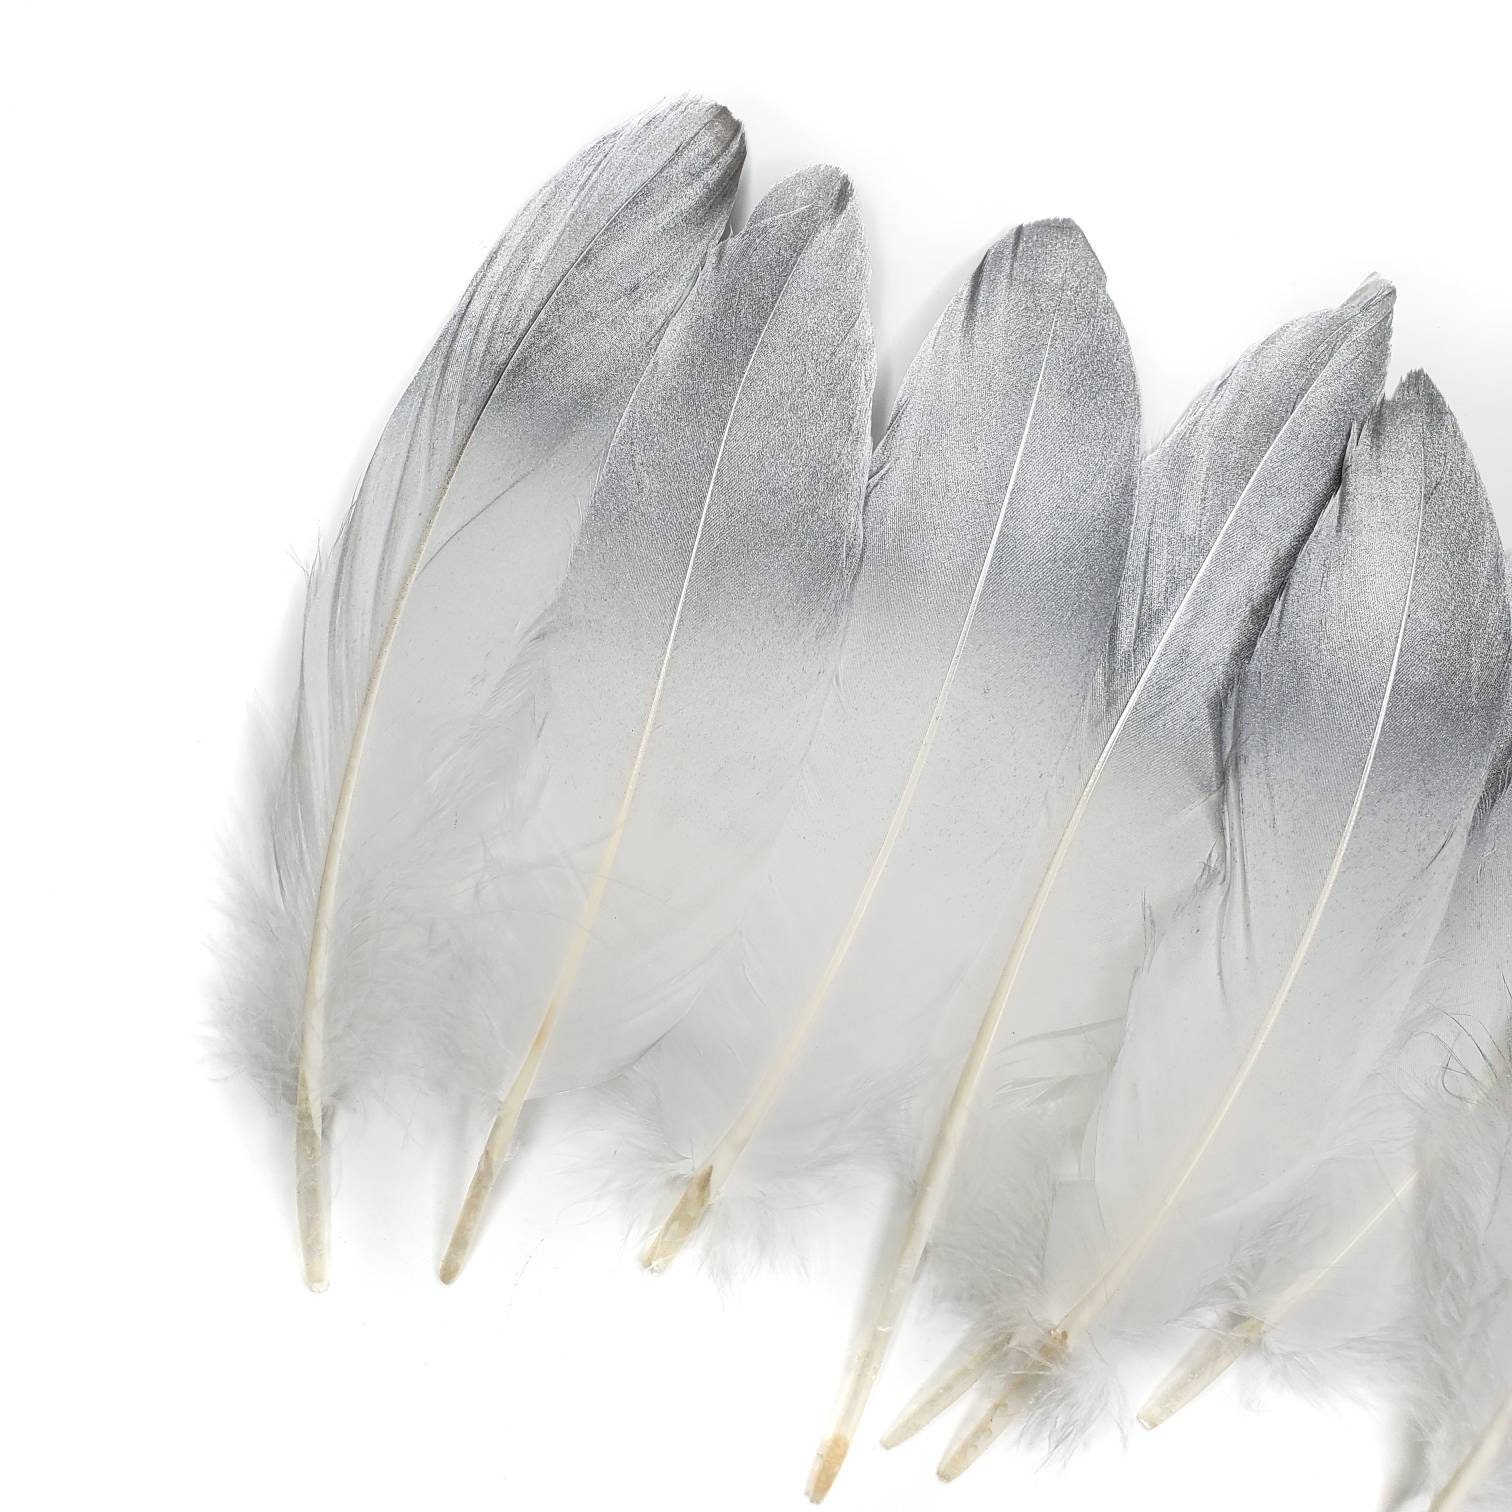 Silver Tip Black Goose Feathers, 10 Pieces, 6-8 Inches, Fall Halloween